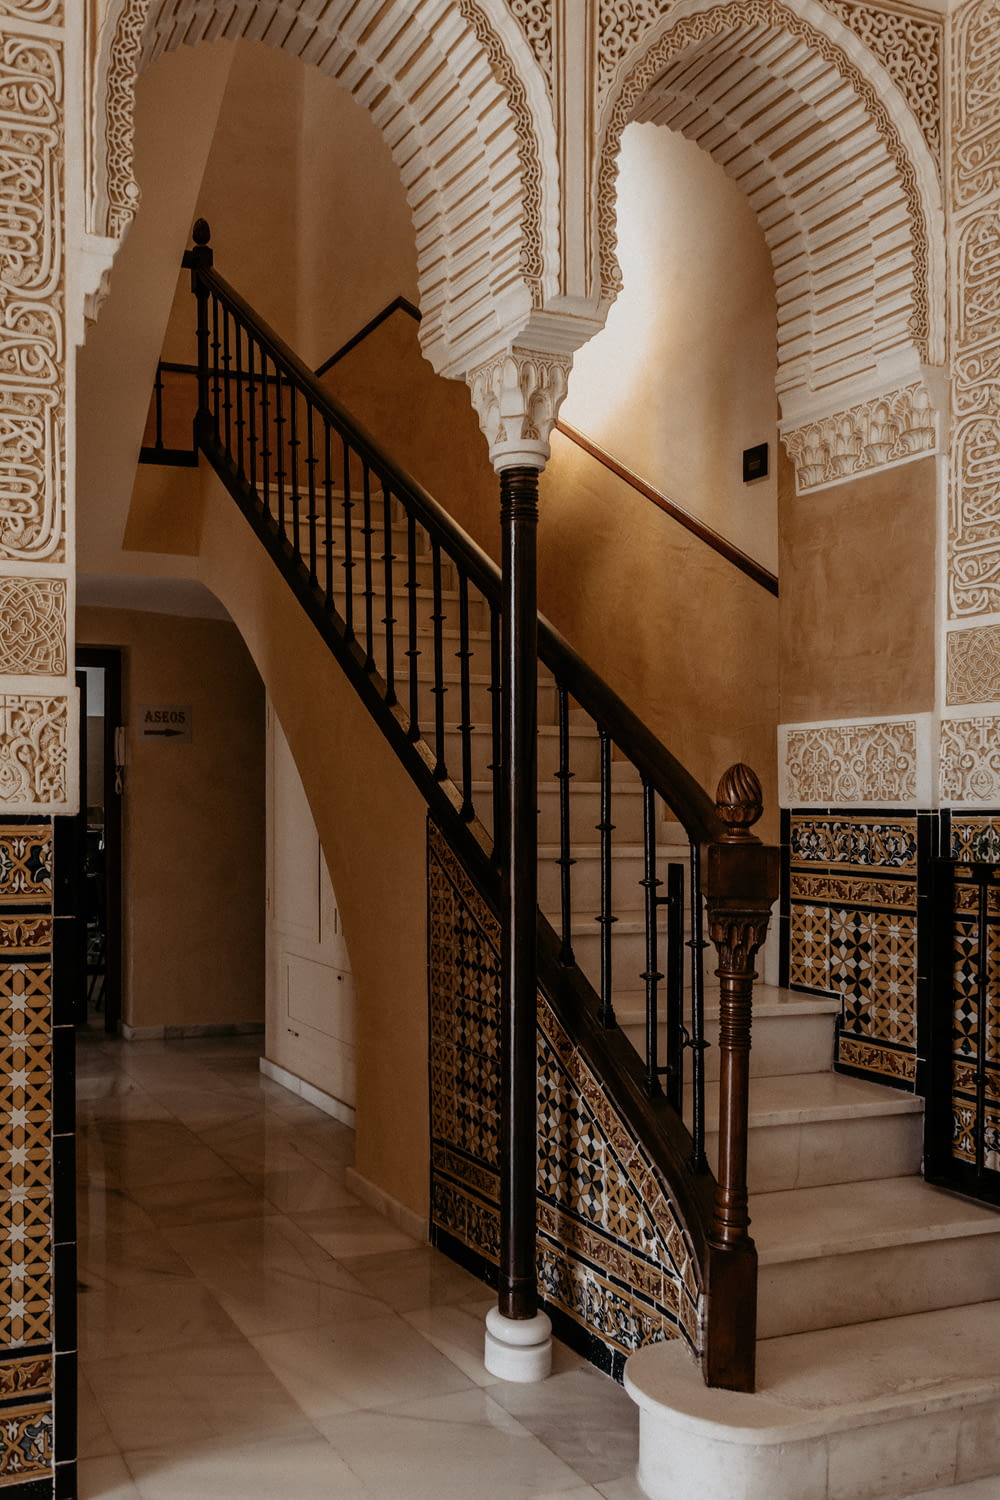 a staircase in a building with a wrought iron railing